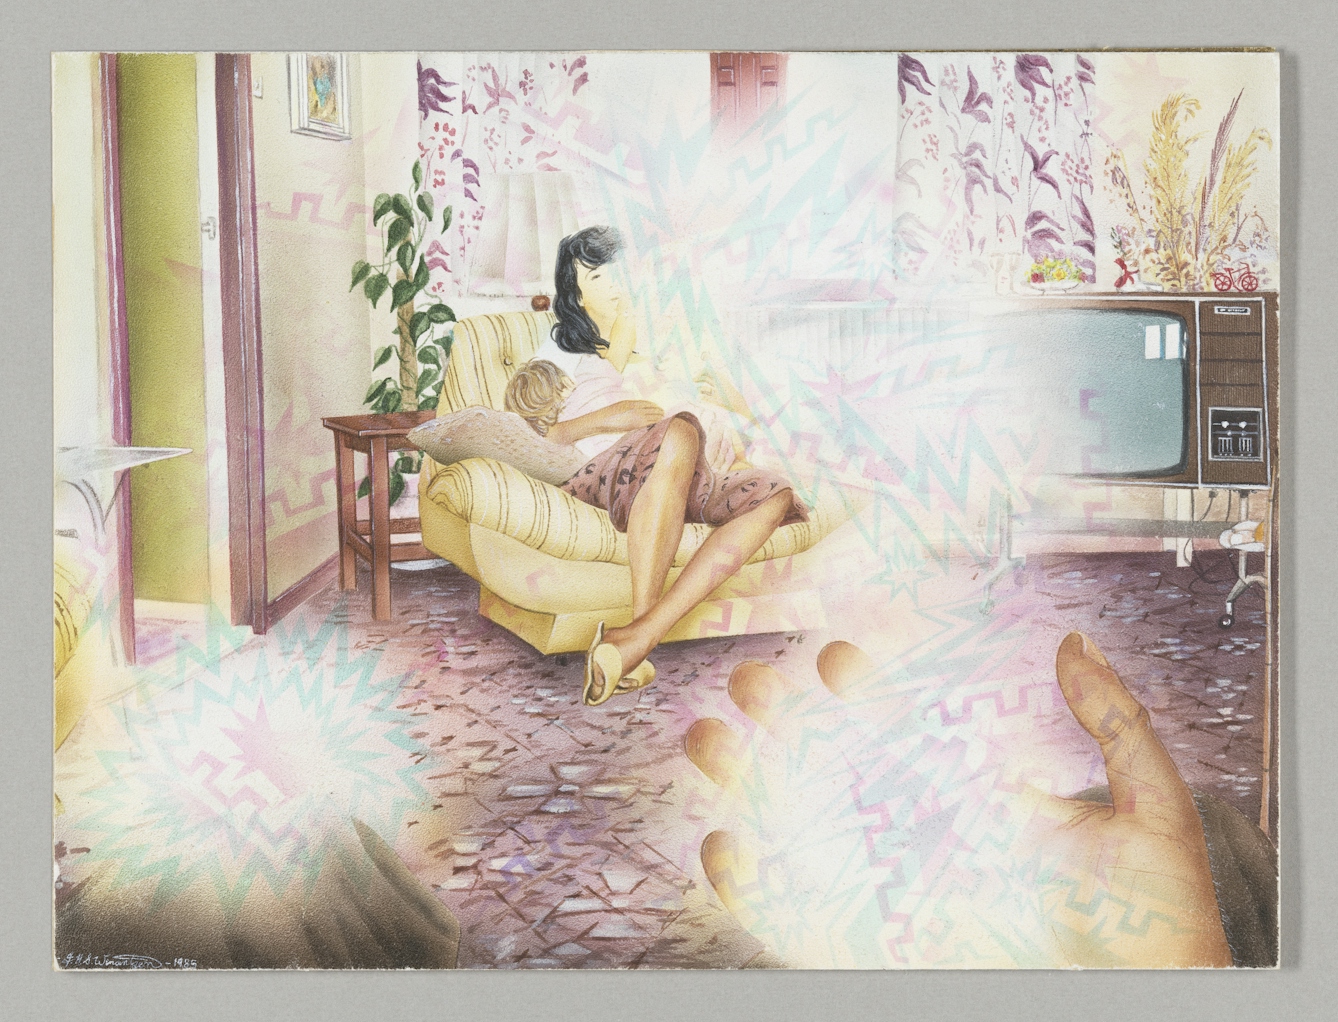 A typical 1980s living room seen from the point of view of a person having a migraine aura. There is a tv on the right, a young mother with a toddler in her arms sits relaxed in an armchair, a small side table and potted plant behind her. Across the patterned carpet you can see the hands of the person having the aura as they look on. The scene is obscured by hazey white 'clouds' containing faint zigzags and patterns which partially cover the mother and tv and teh onlooker's hands.